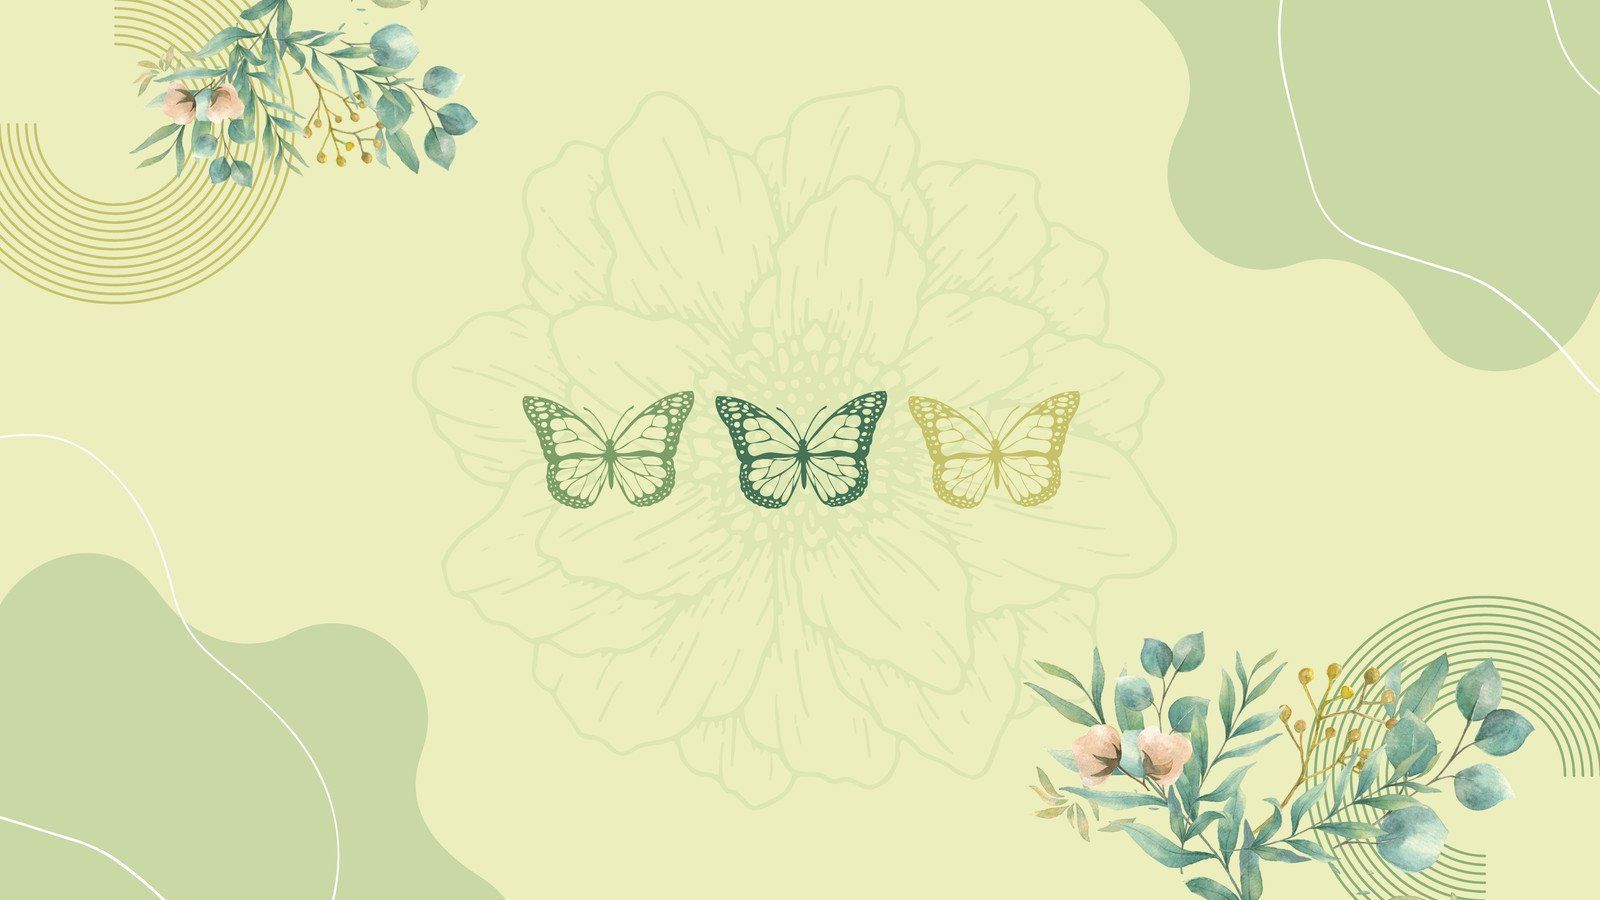 A pale green background with a large flower in the middle and butterflies around it. - Sage green, green